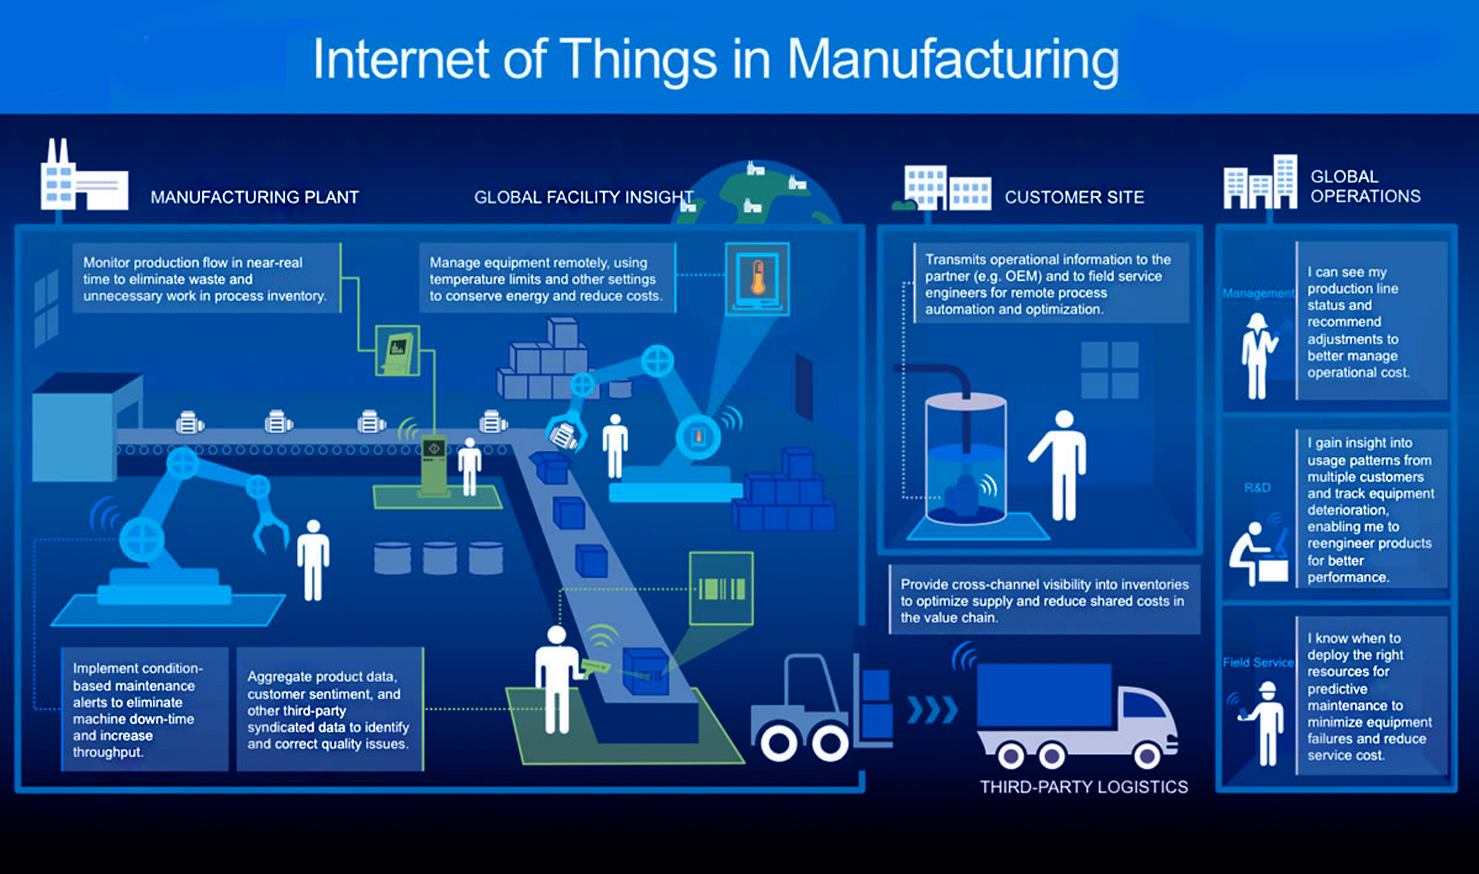 Internet of Things in manufacturing